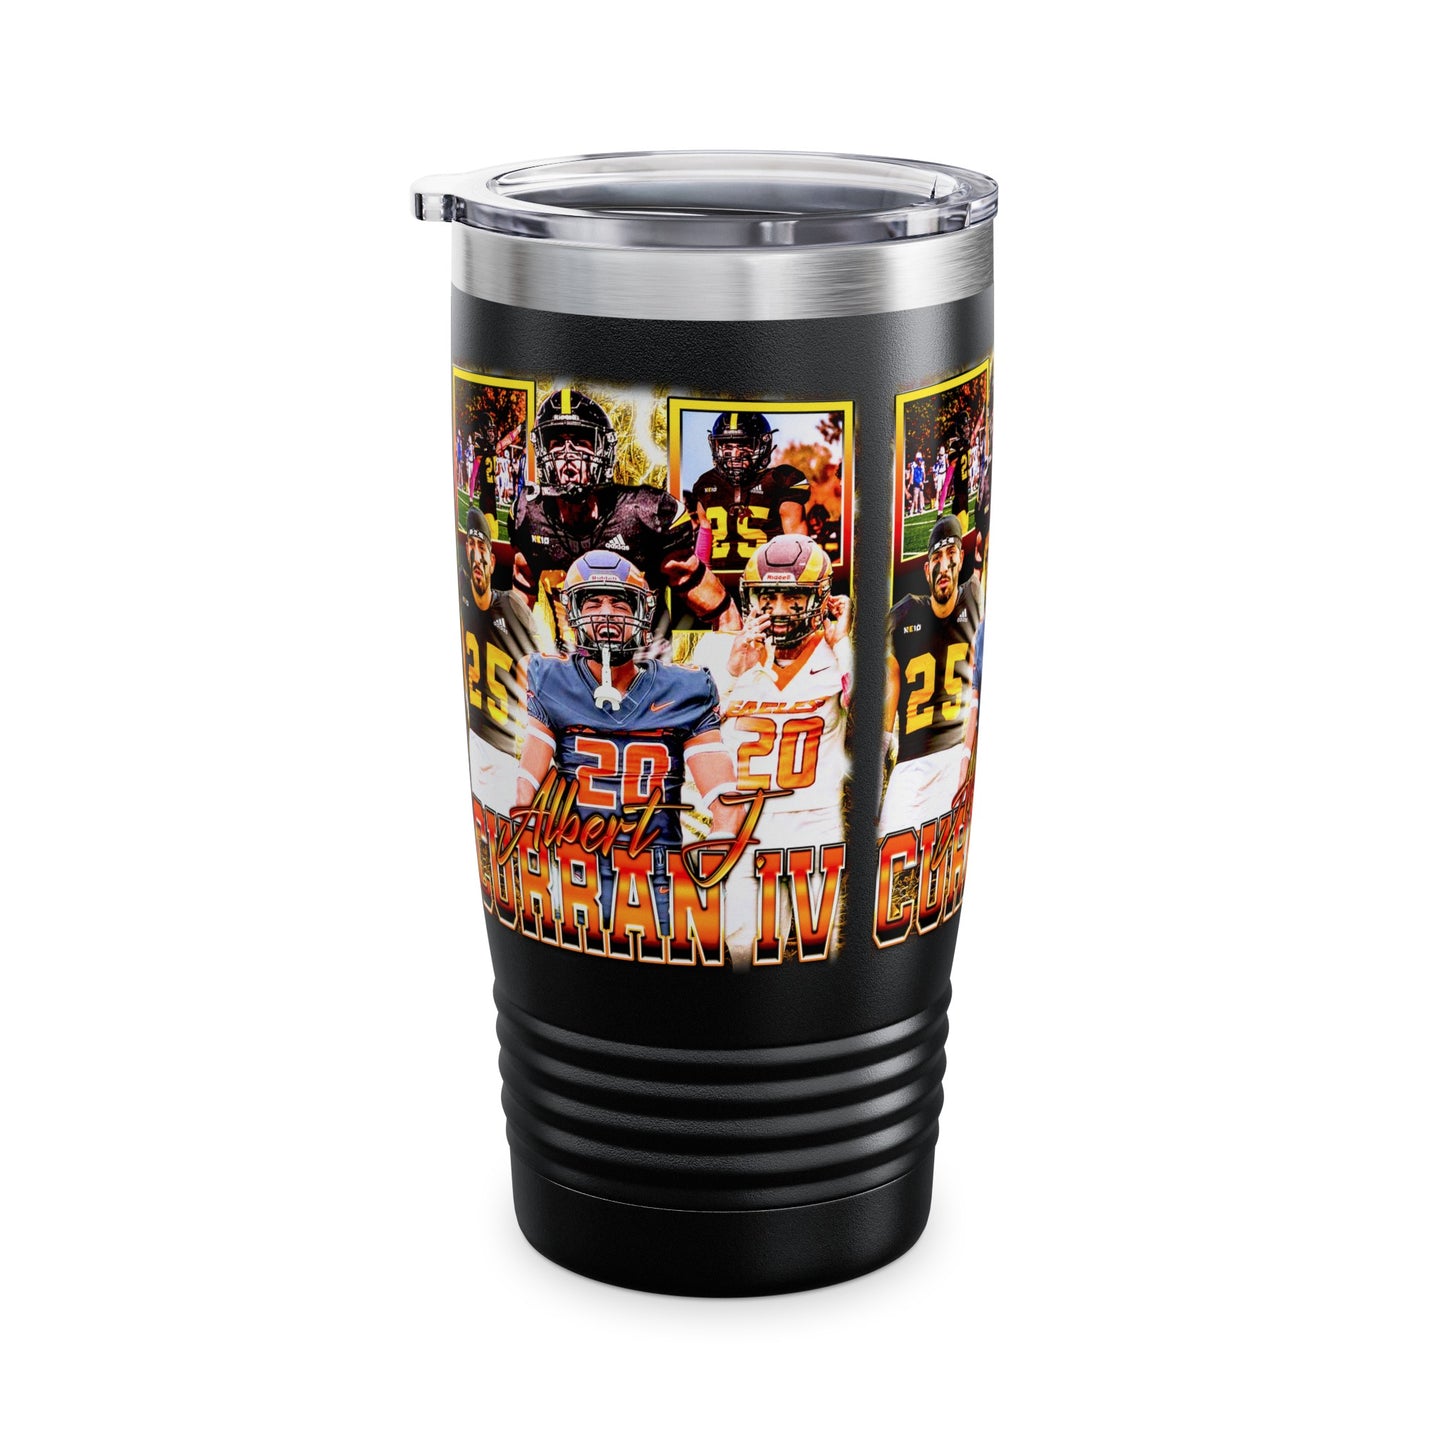 Curran IV Stainless Steal Tumbler